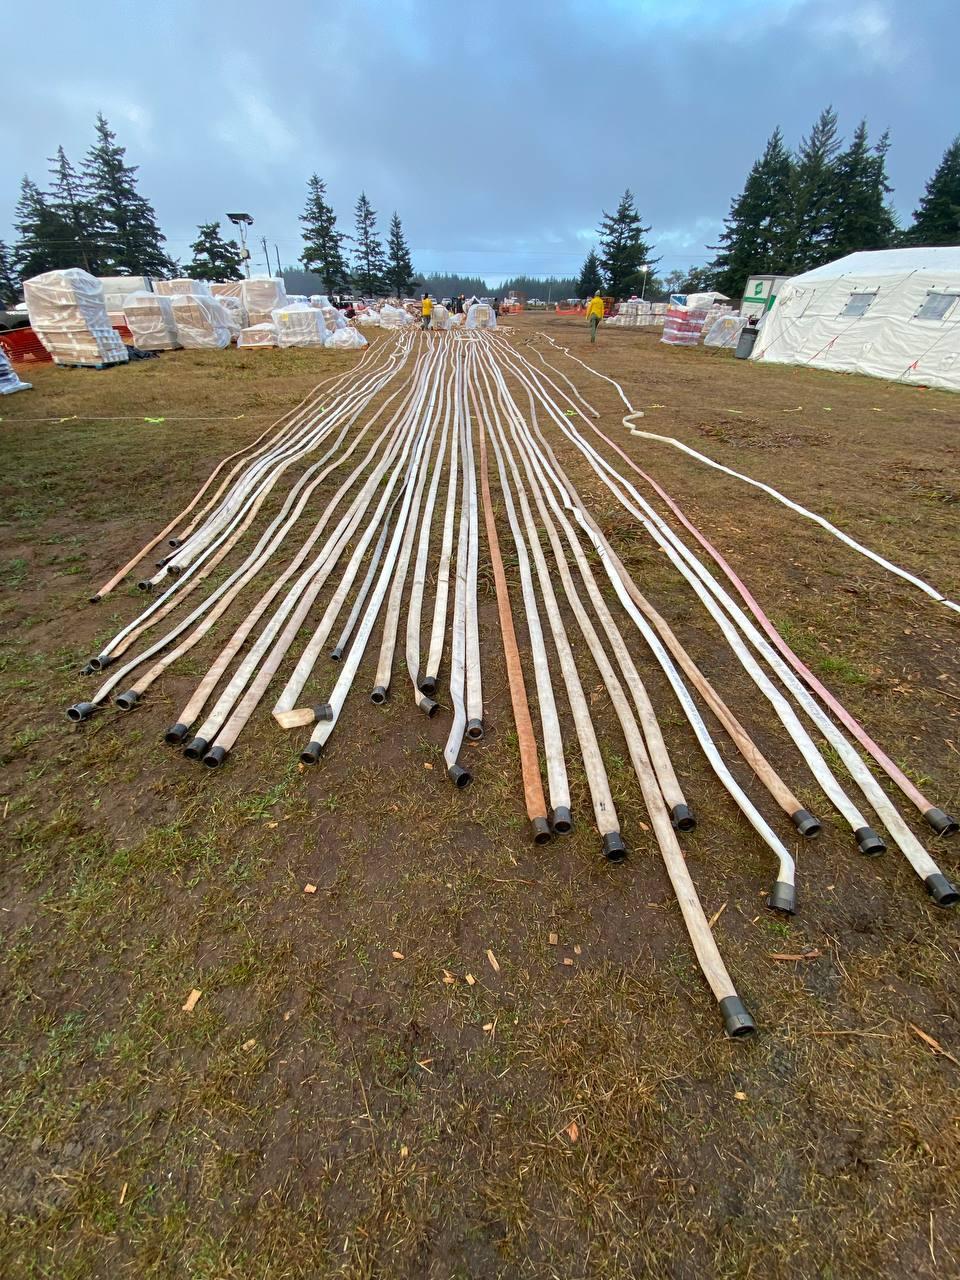 Over a dozen hoses are laid out side by side on the ground.  Stacked pallets of supplies are located to the left with a yurt to the right. Background is cloudy sky.